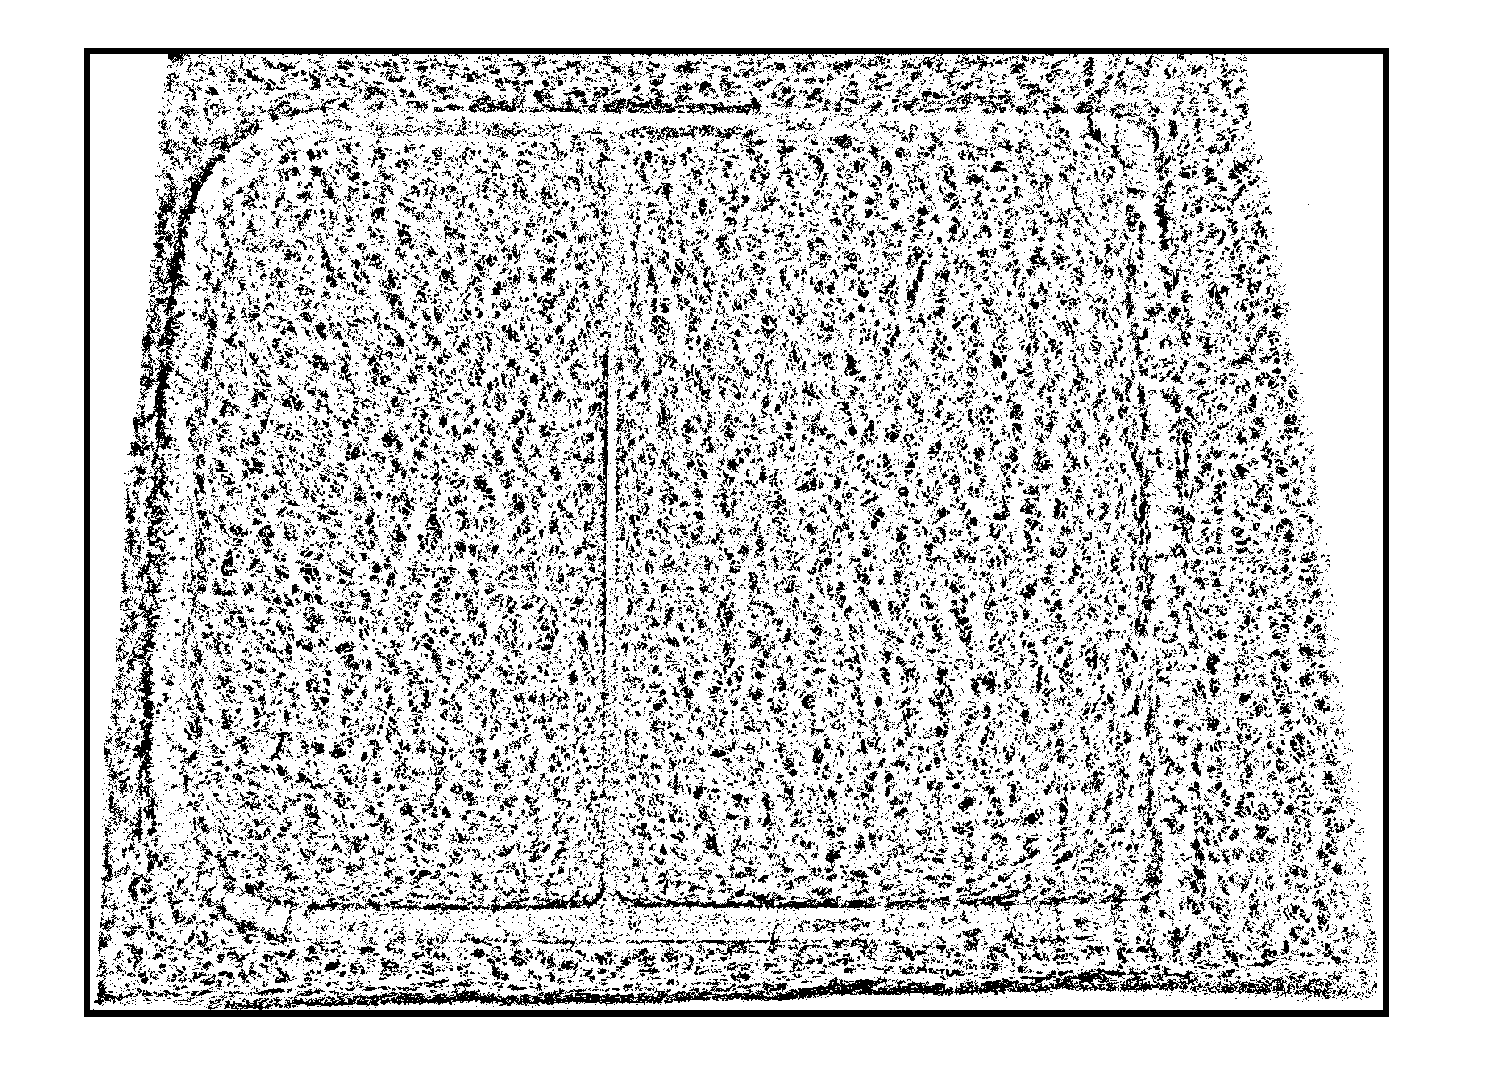 Method for forming cushions